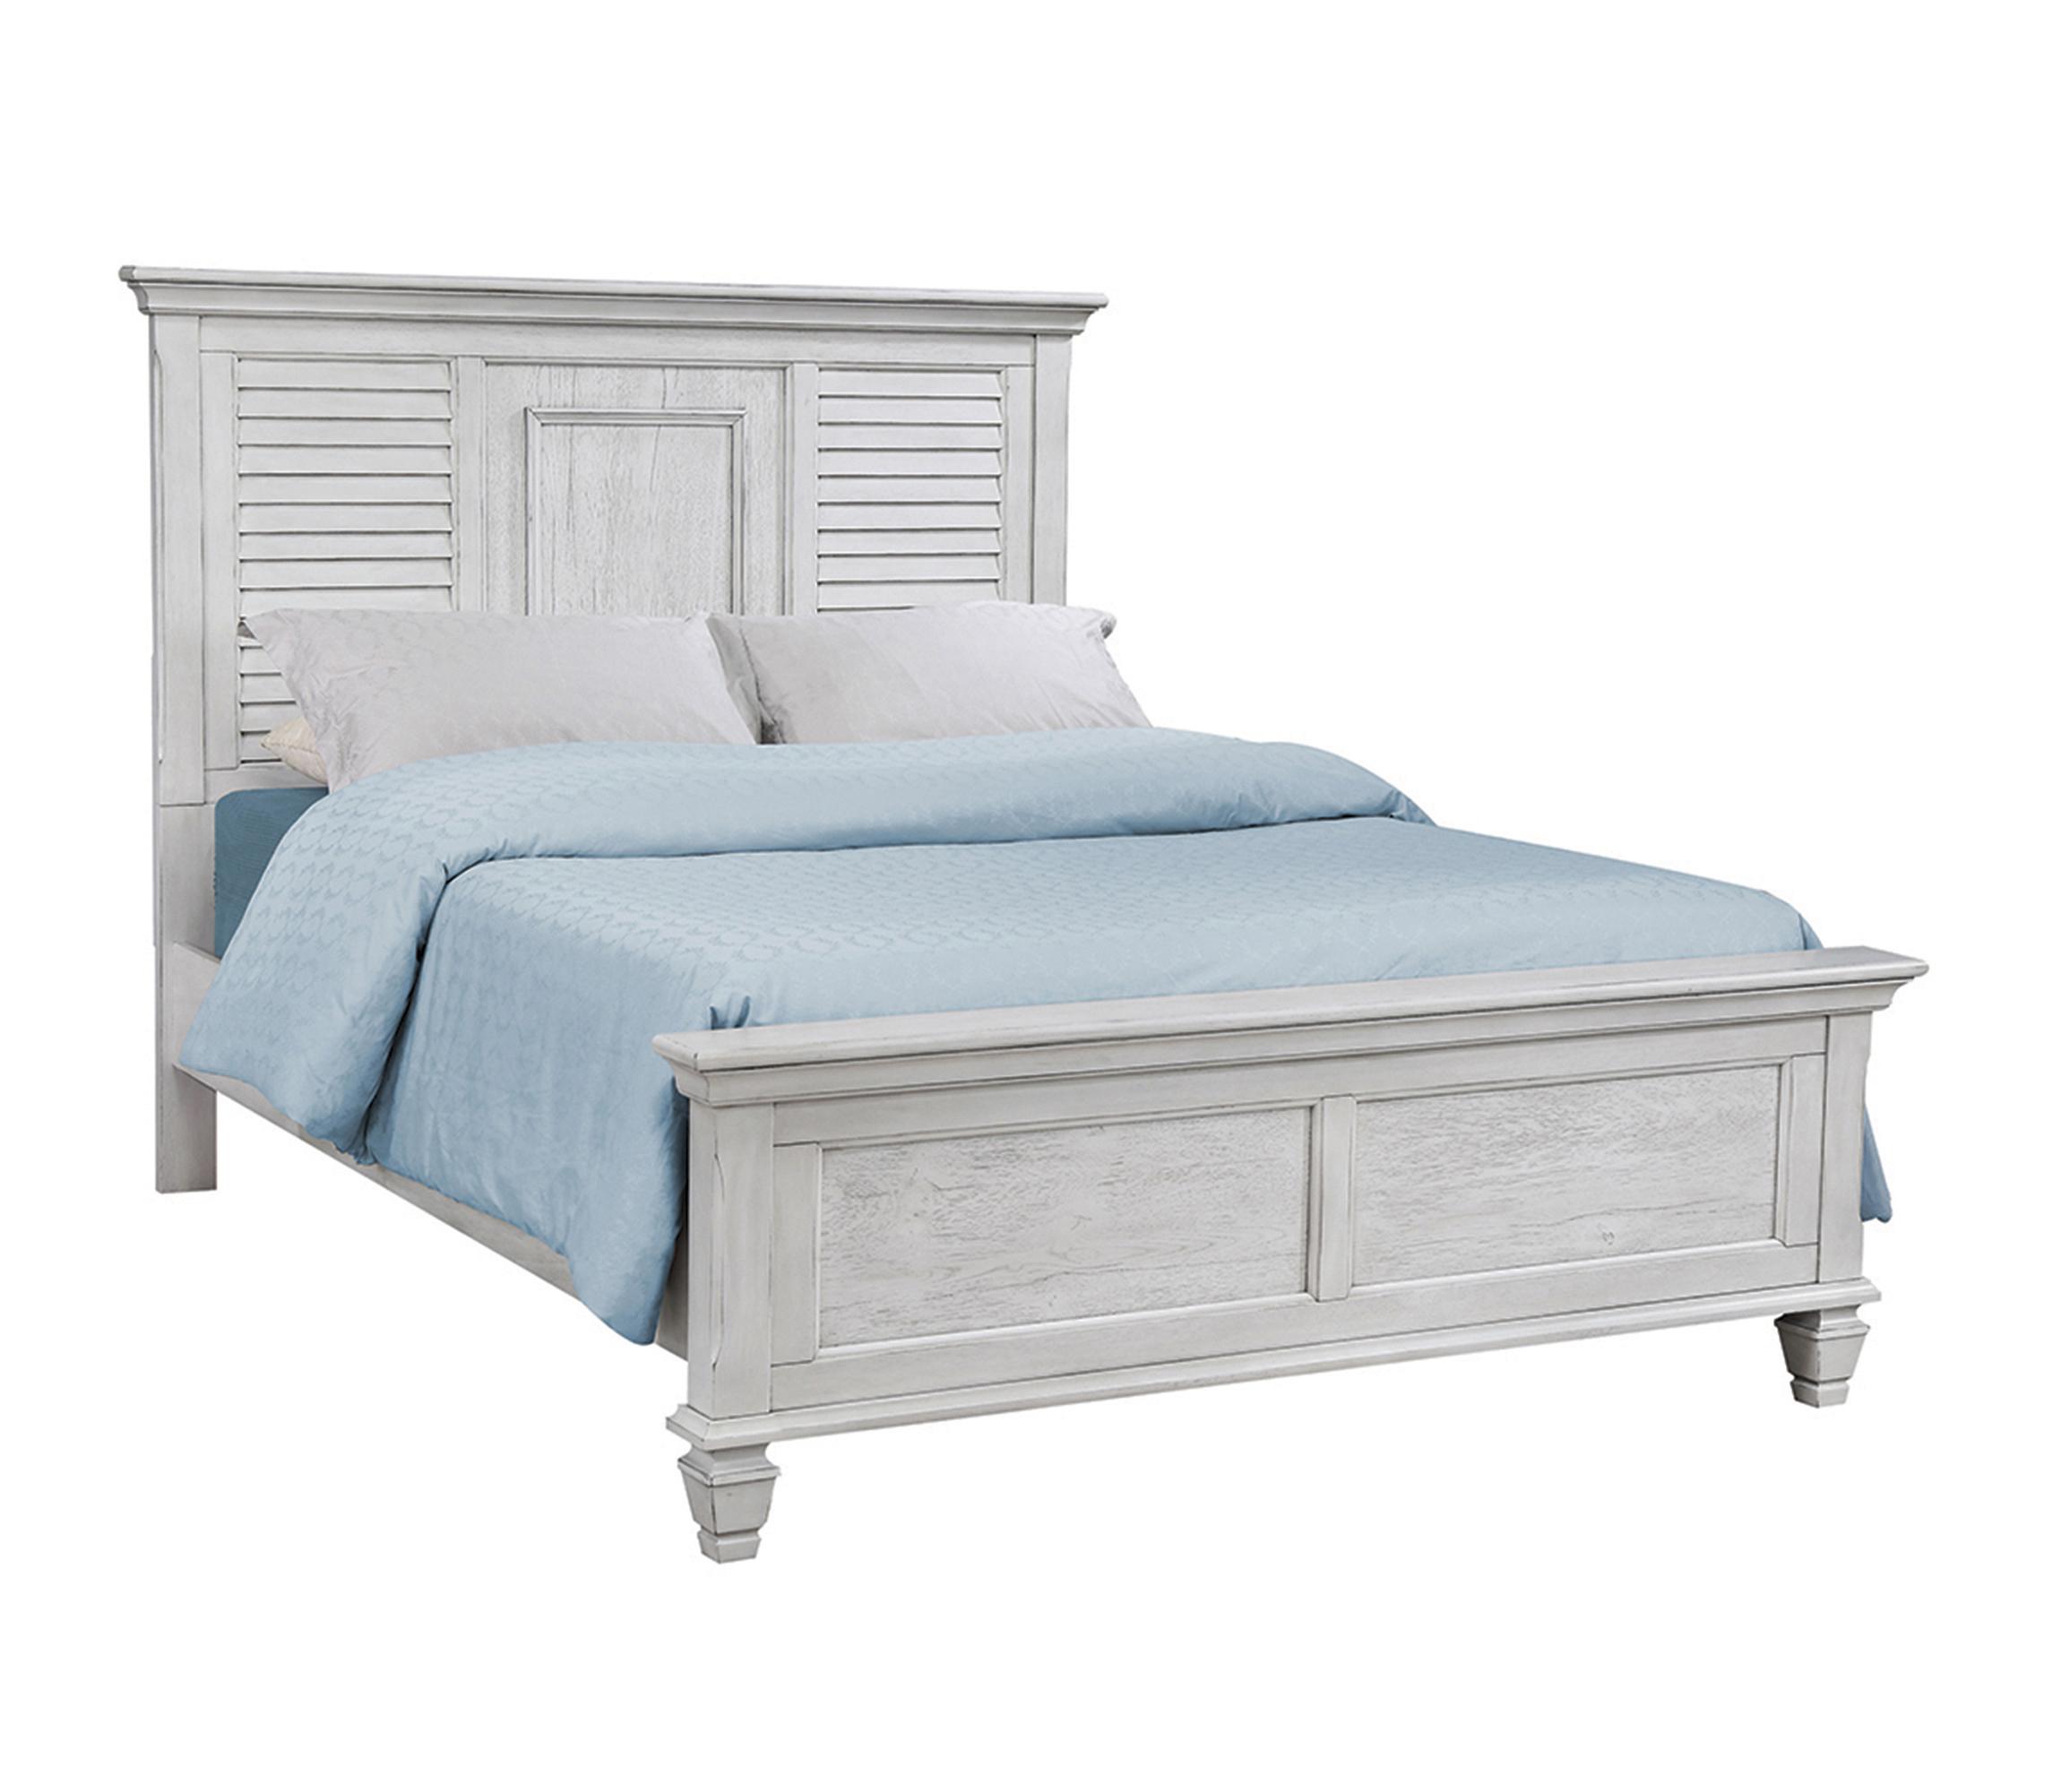 Transitional Bed 205331Q Franco 205331Q in Antique White 